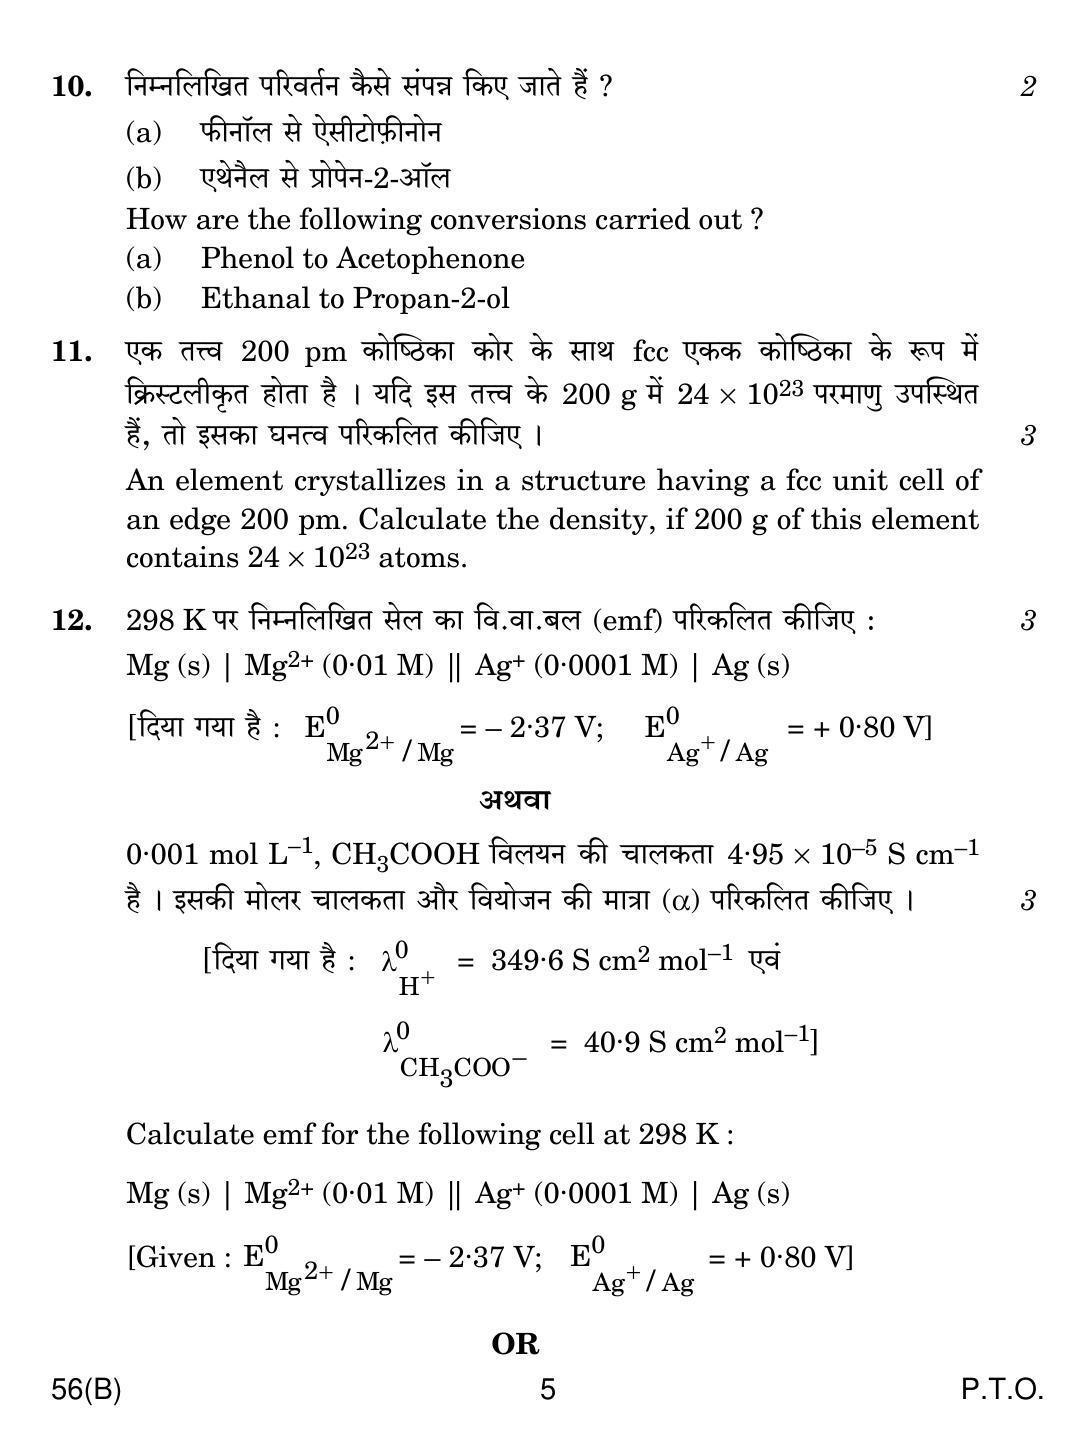 CBSE Class 12 56(B) CHEMISTRY FOR BLIND CANDIDATES 2018 Question Paper - Page 5